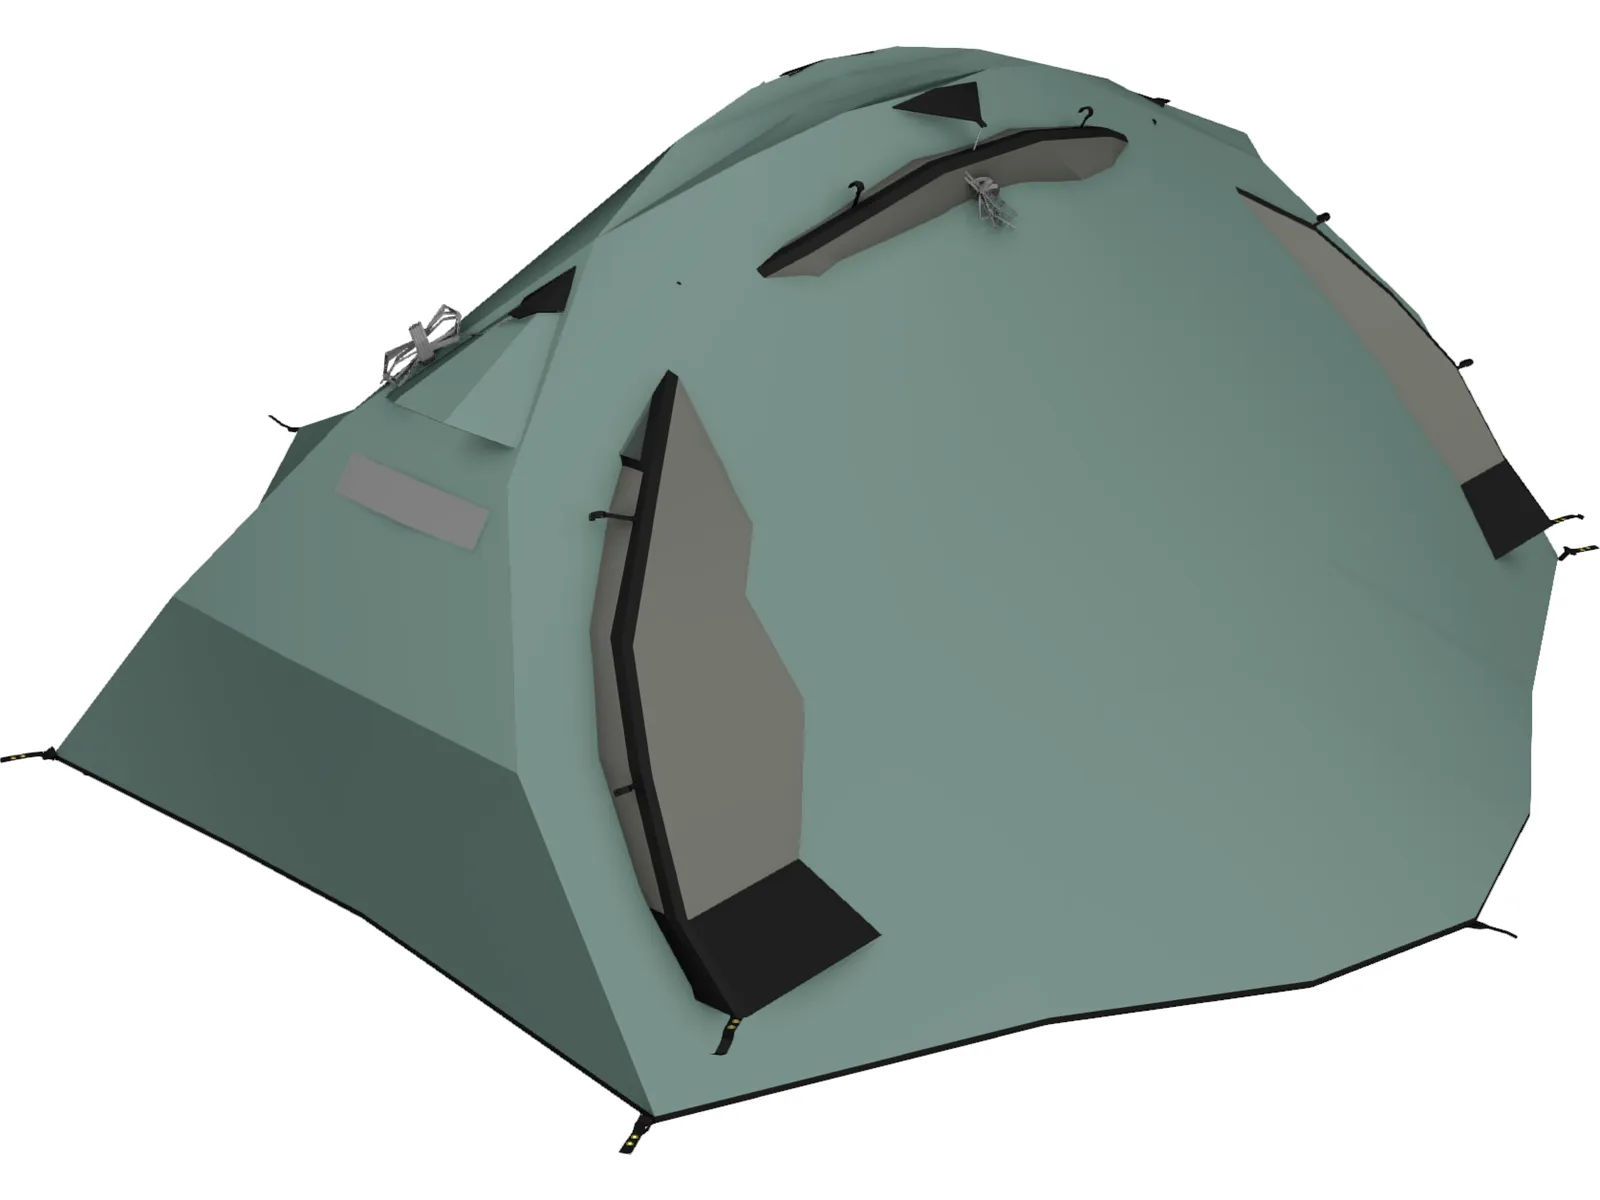 Tent (Small For Travelling And Outdoors) 3D Model